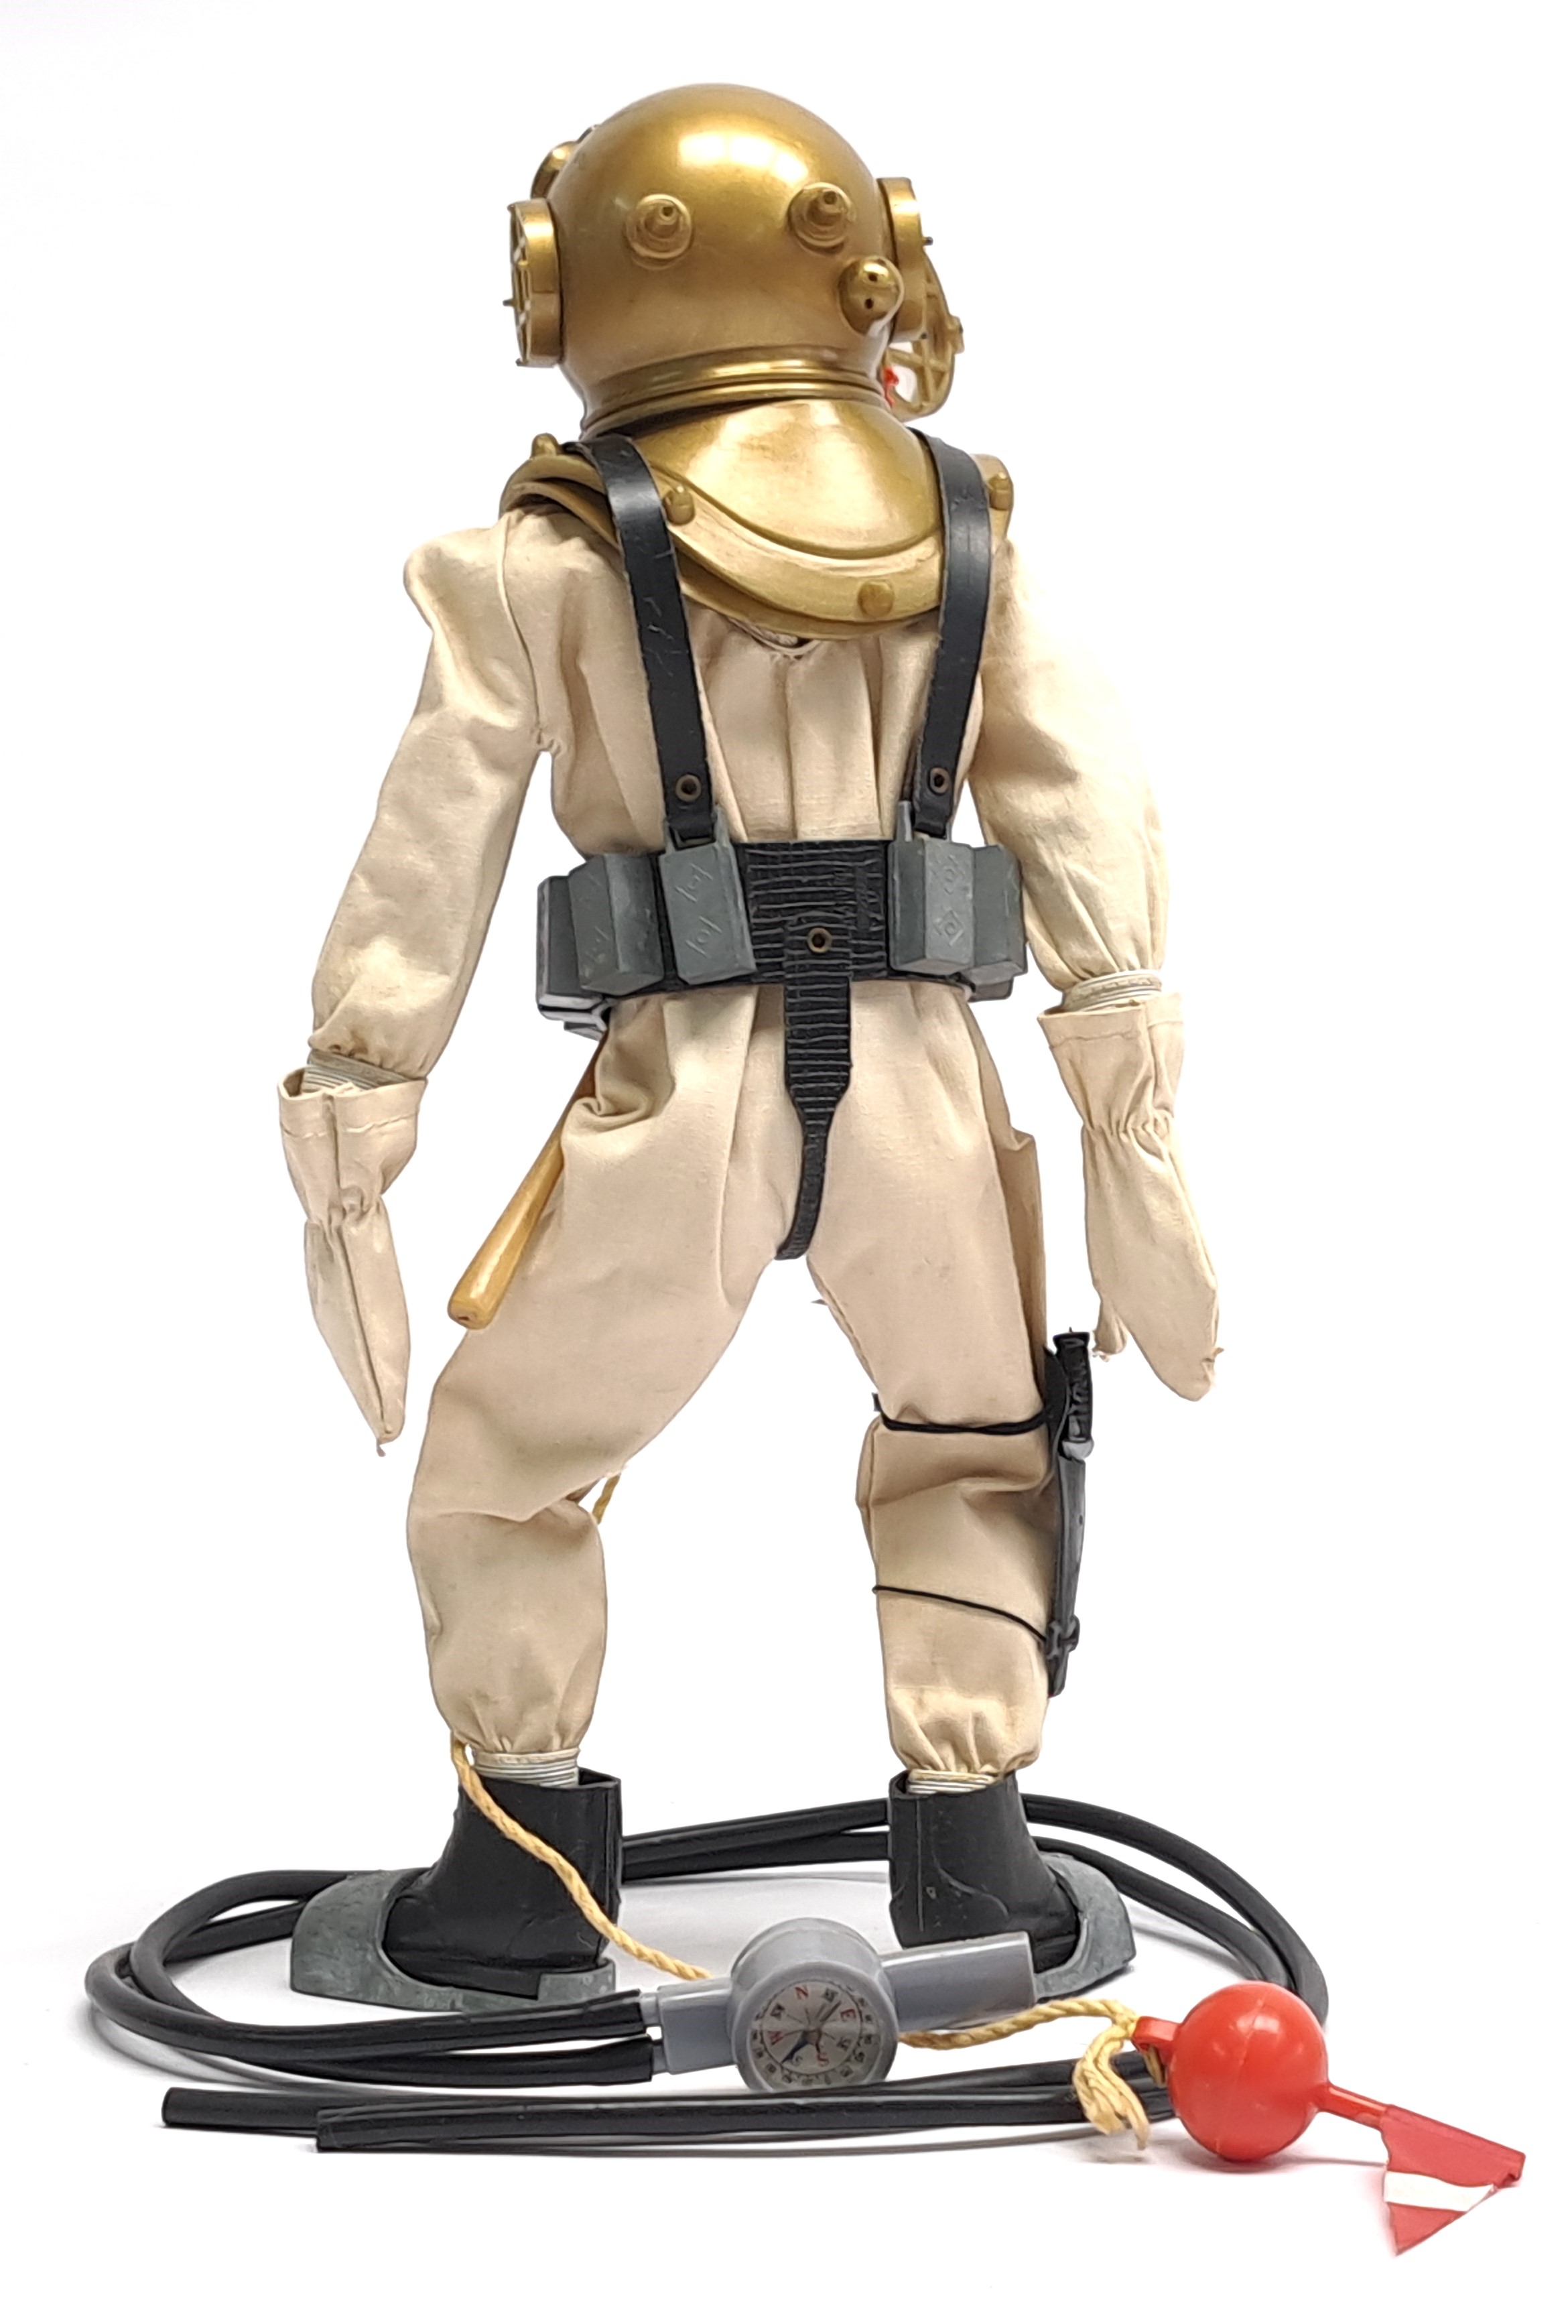 Palitoy Vintage Action Man Deep Sea Diver, brown painted head figure with hard plastic hands, wea... - Image 2 of 2